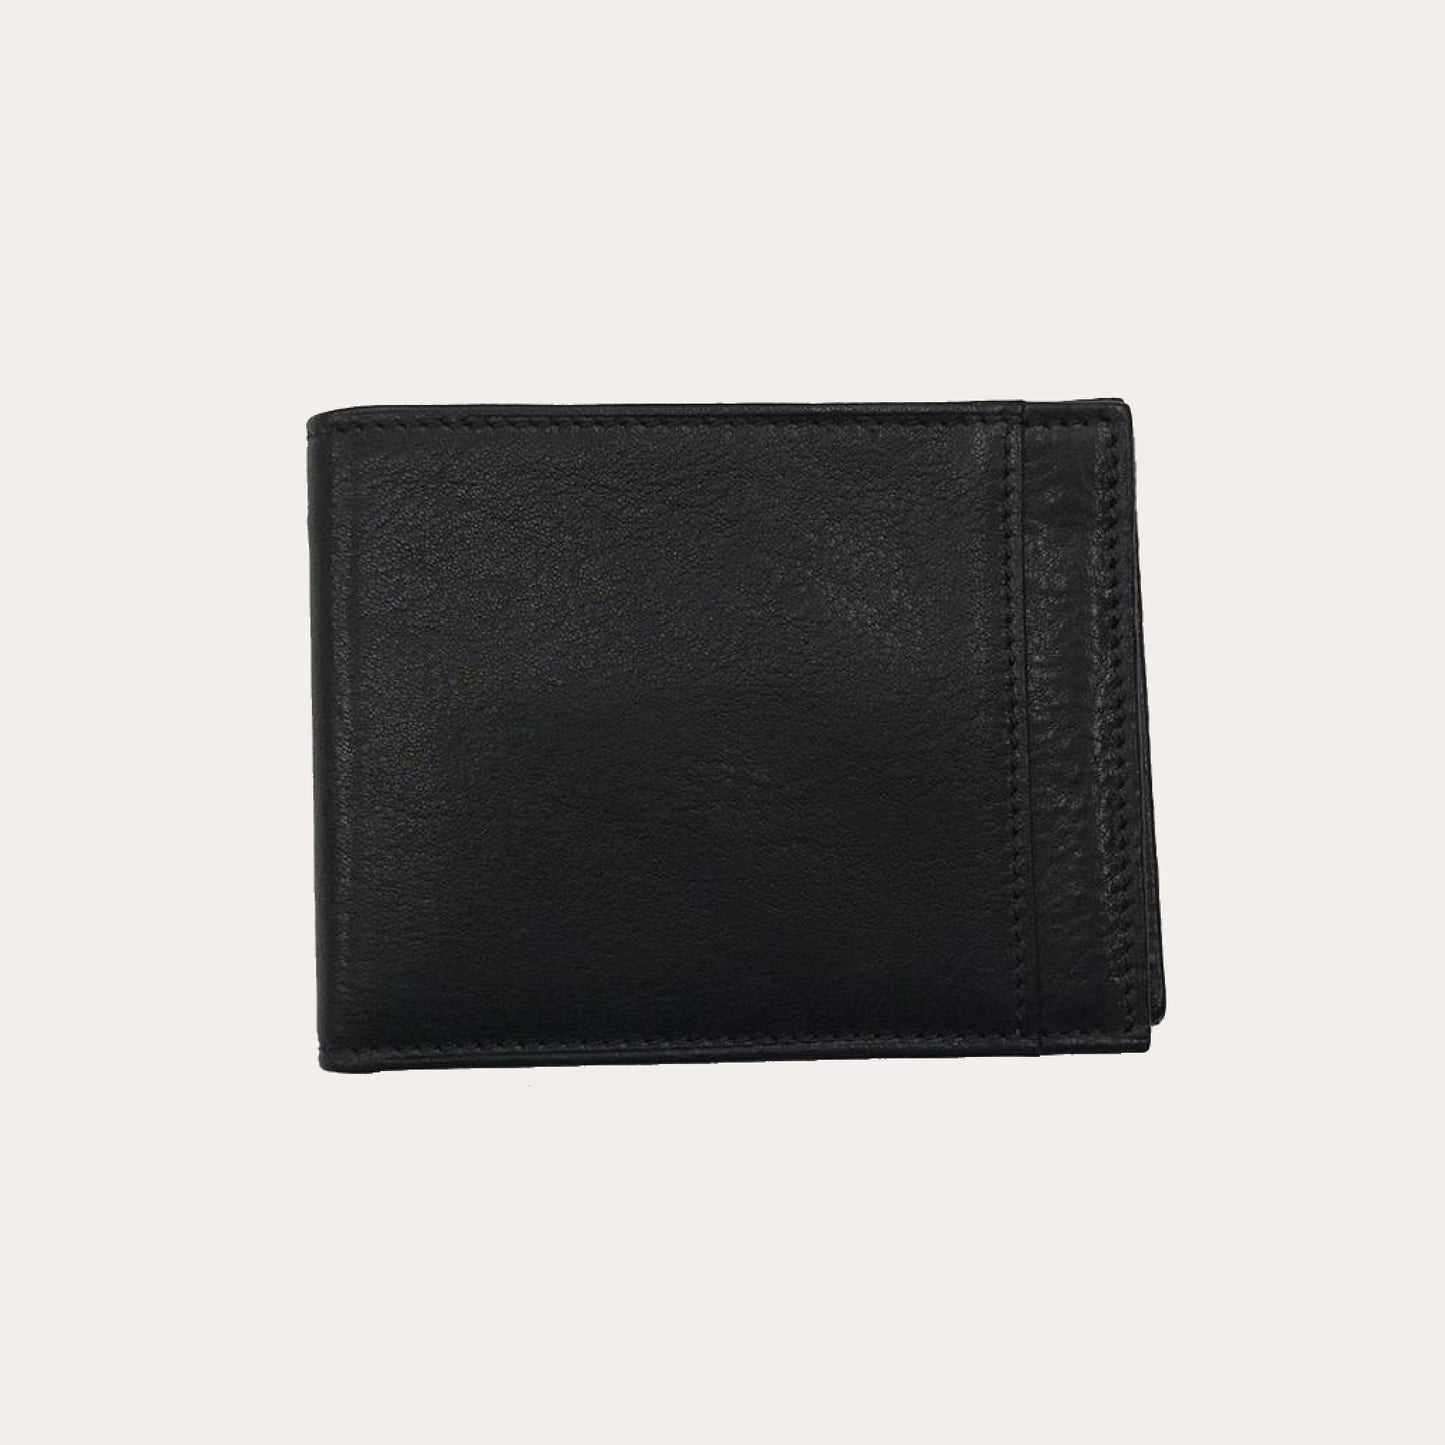 Black Vacchetta Leather Wallet-3 Credit Card/Coin Section